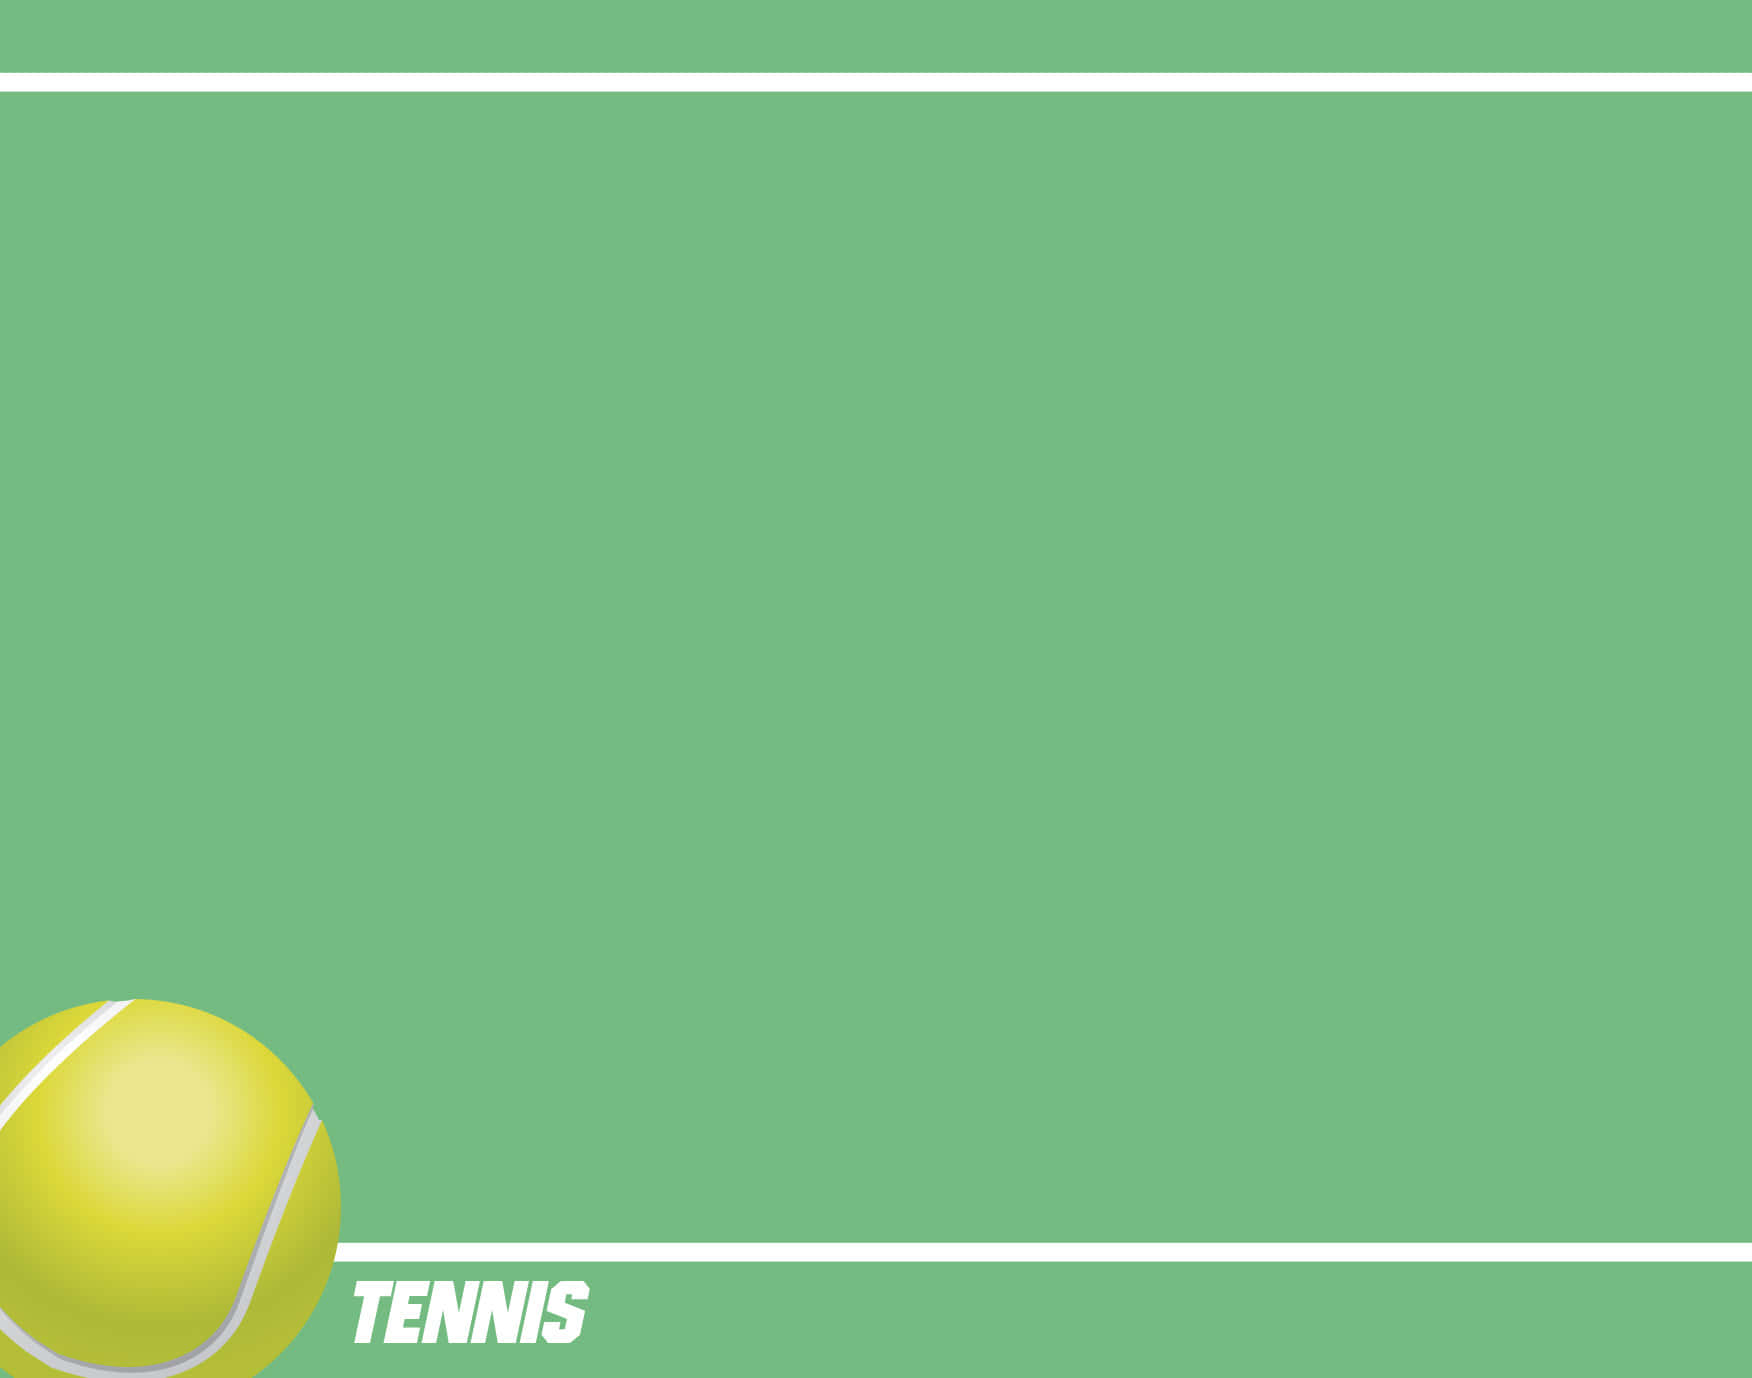 HD Green And White Tennis Poster Background